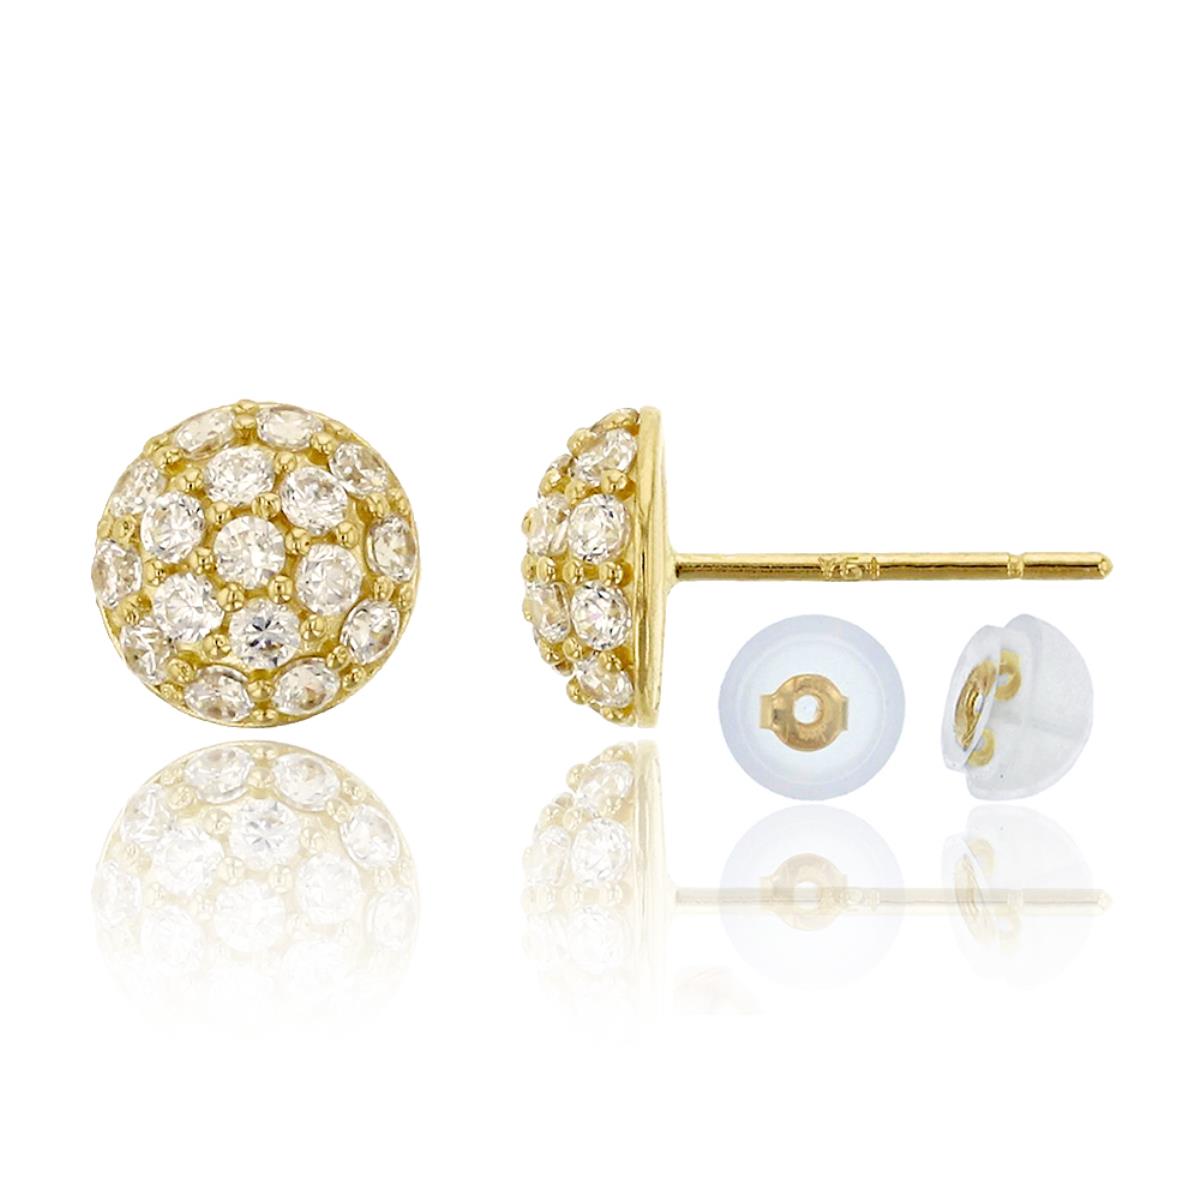 10K Yellow Gold Micropave 6mm Circle Dome CZ Stud & 10K Silicone Back